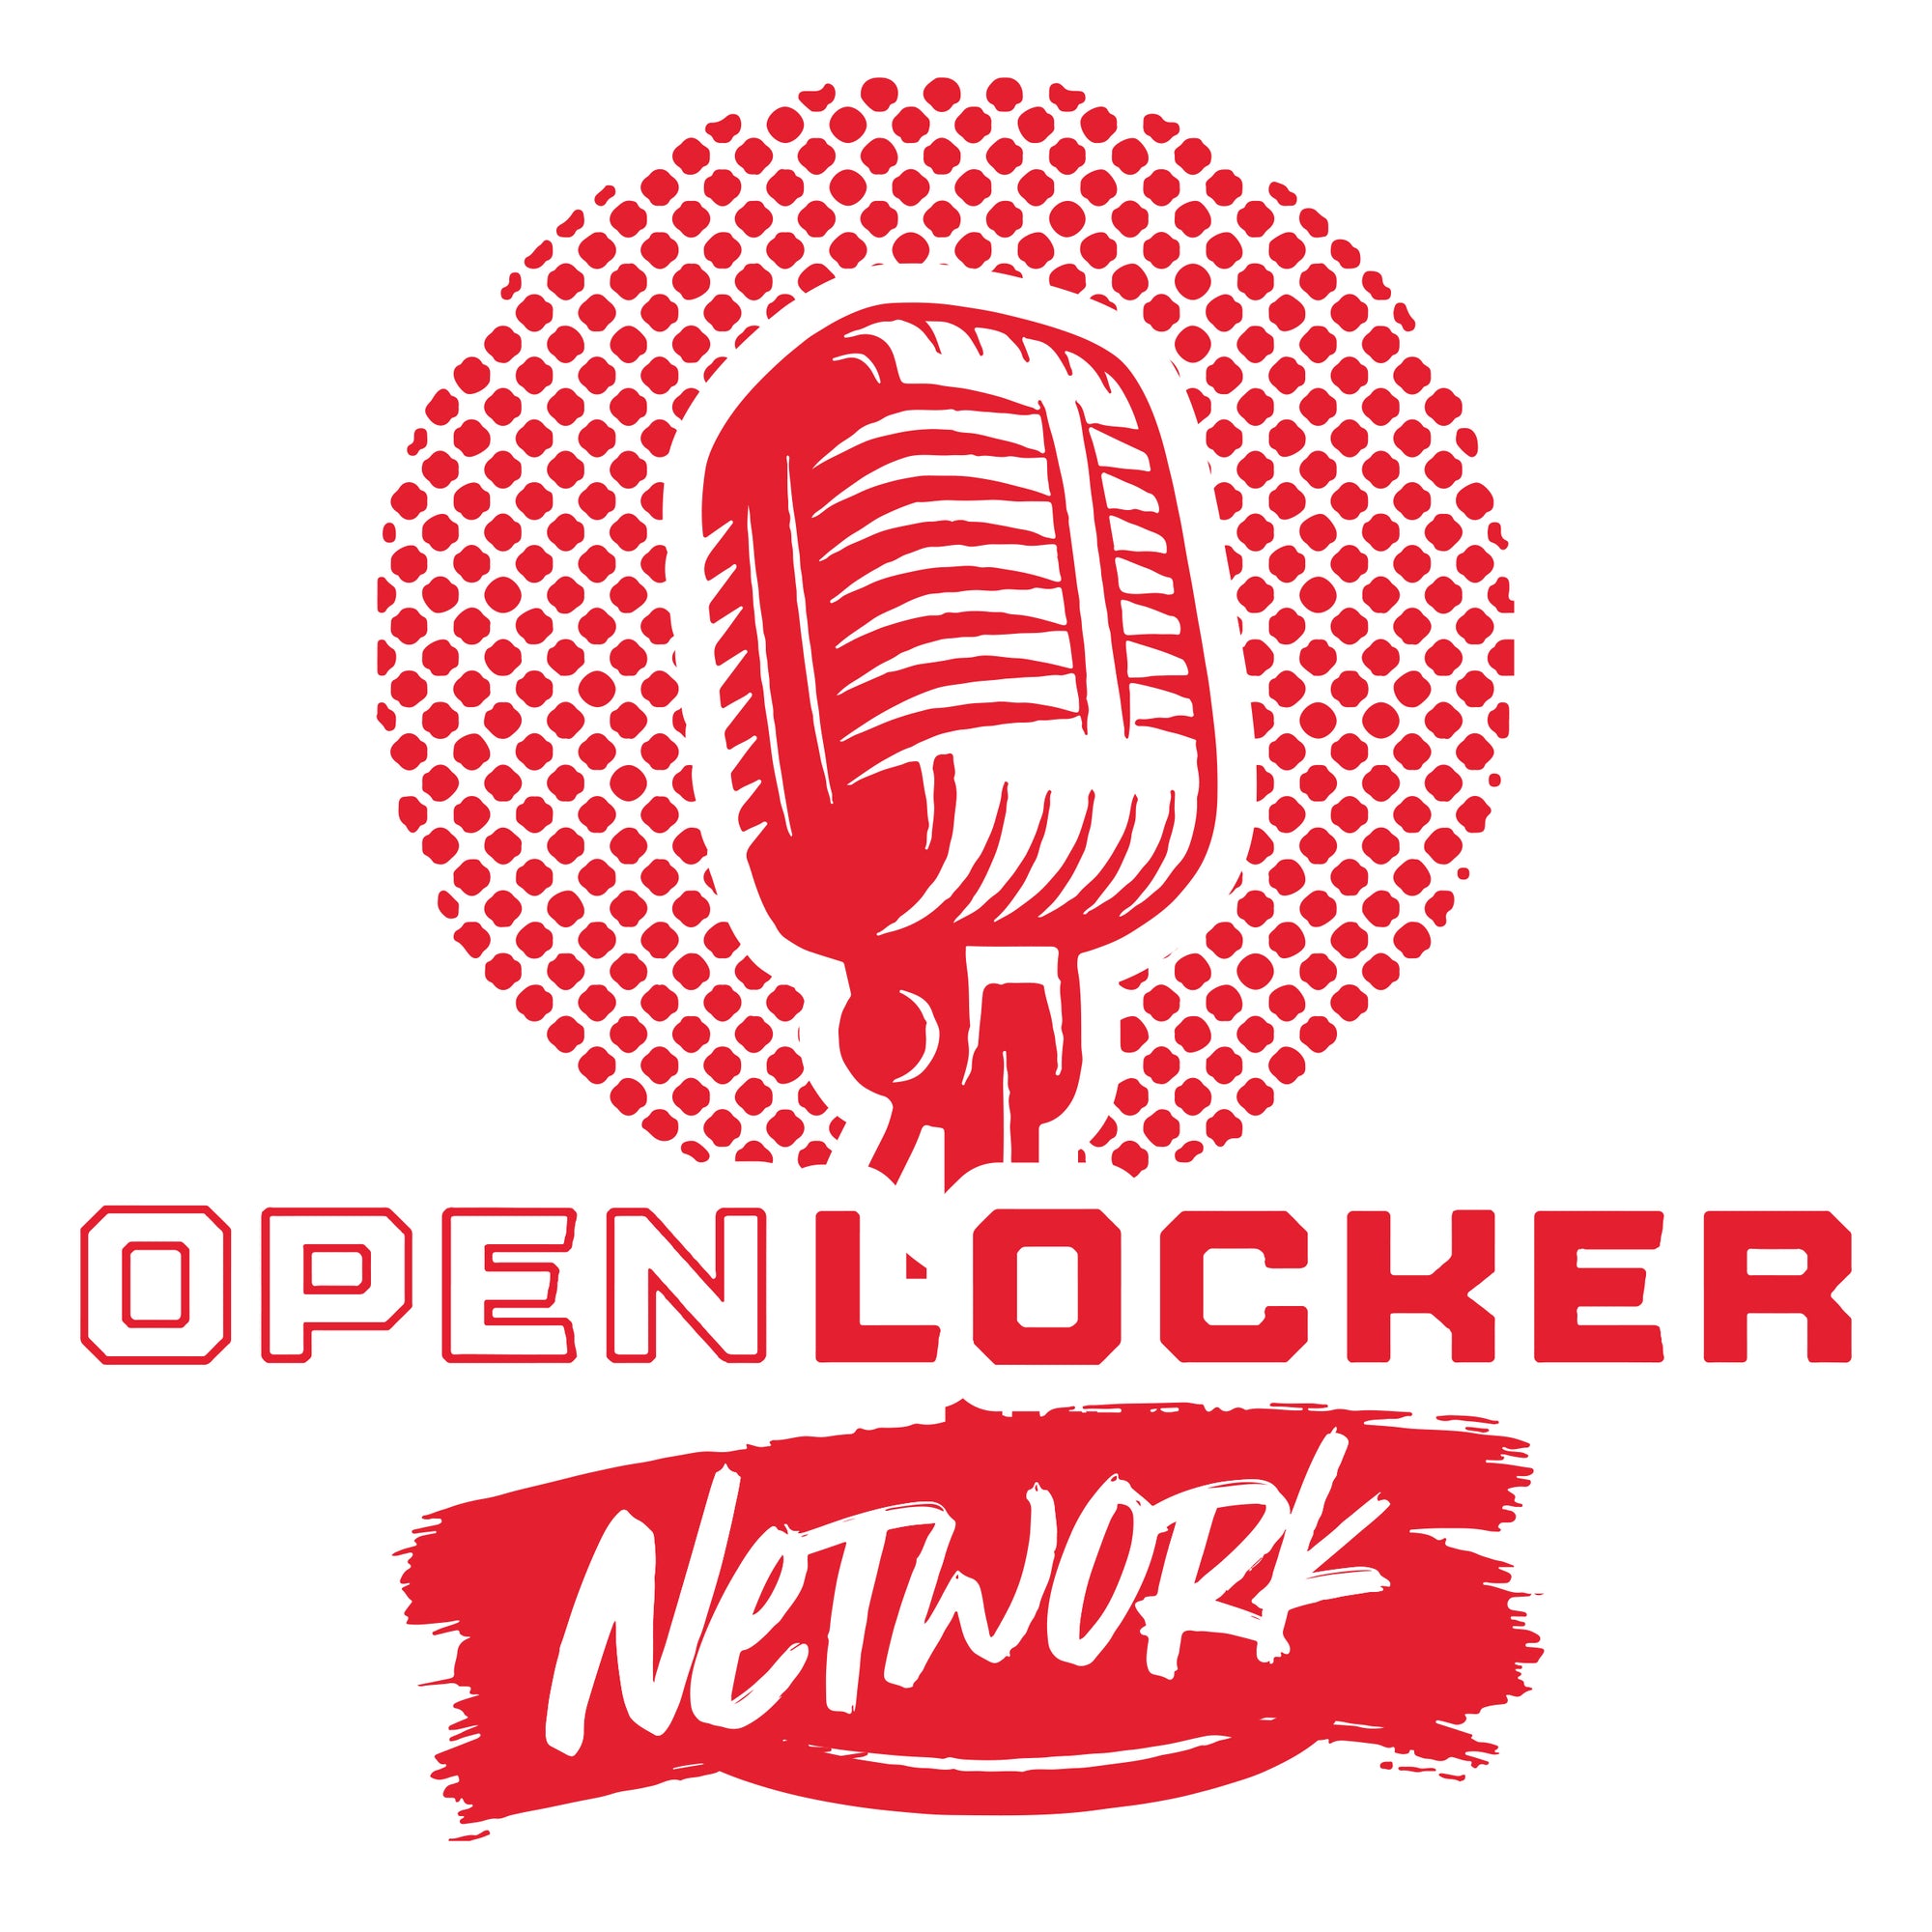 OpenLocker Announces Launch of the OpenLocker Podcast Network to Connect Fans and Athletes for All of Its NIL Communities